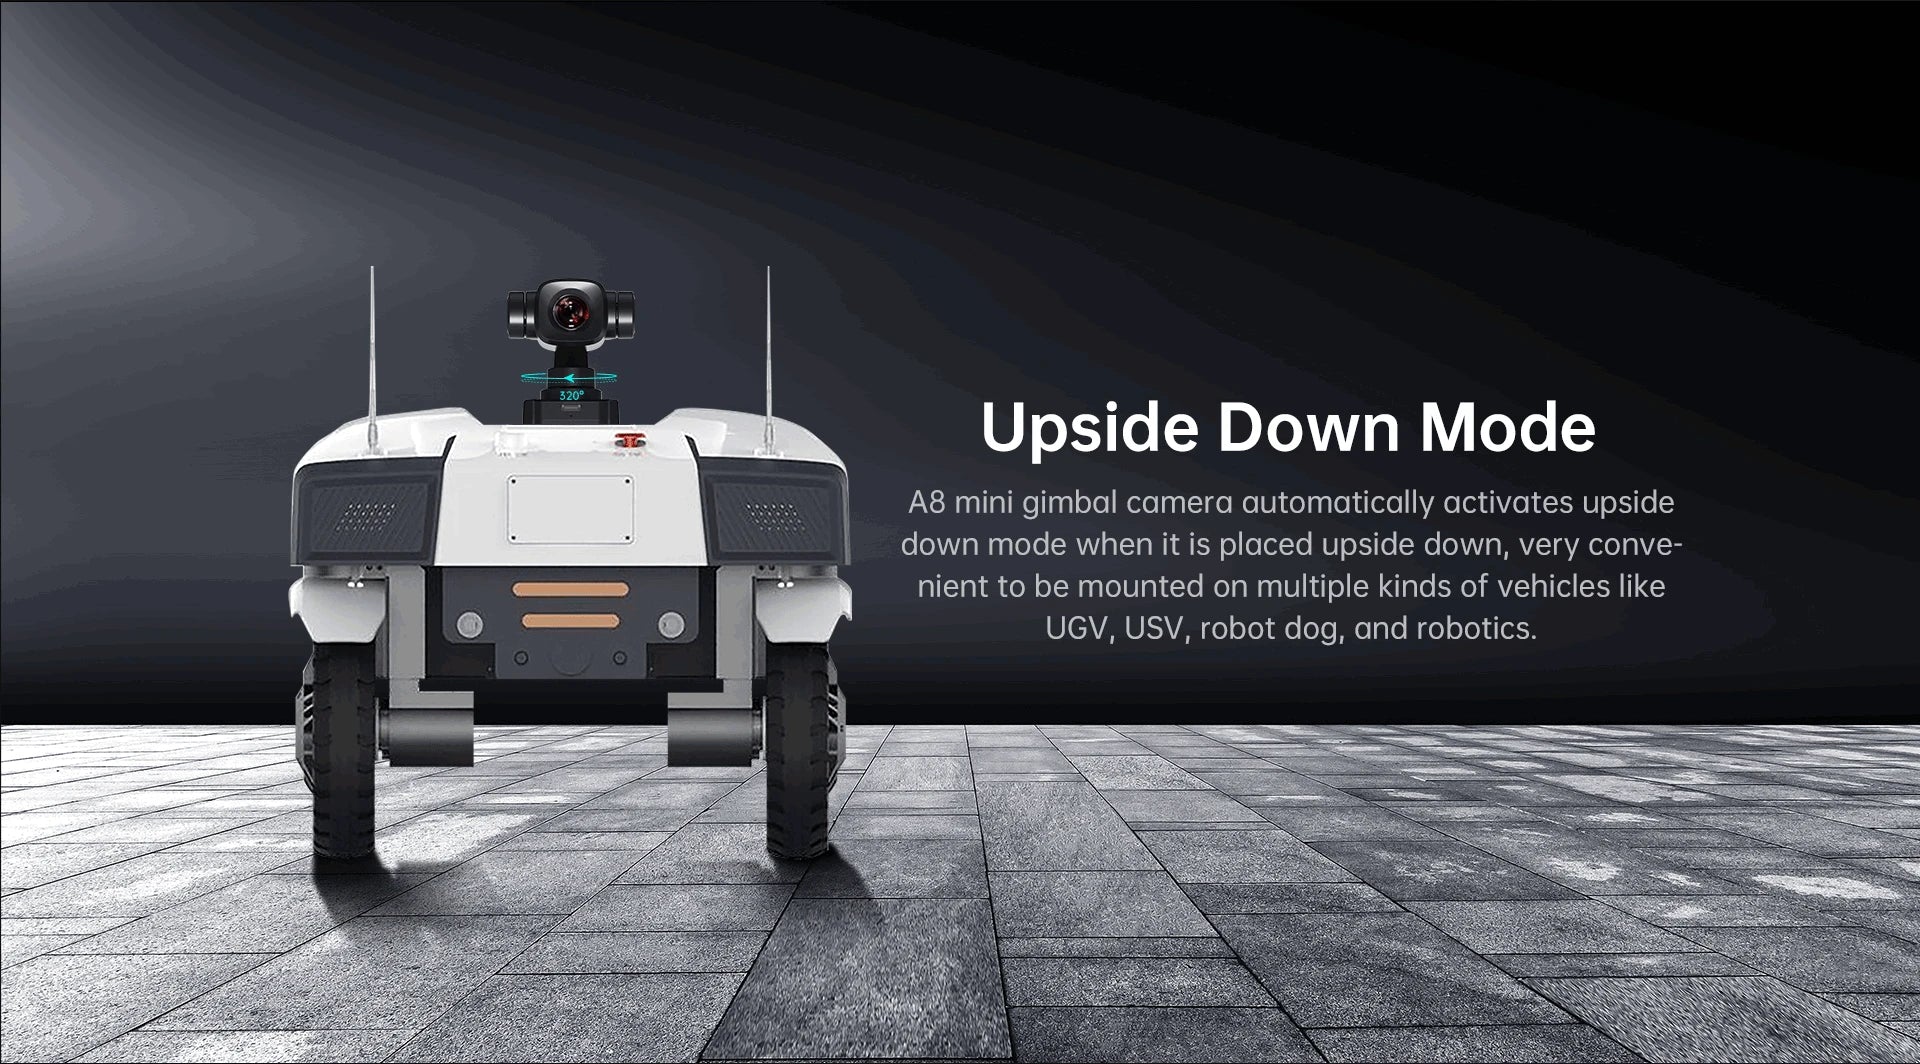 A8 mini gimbal camera automatically activates upside down mode when it is placed upside